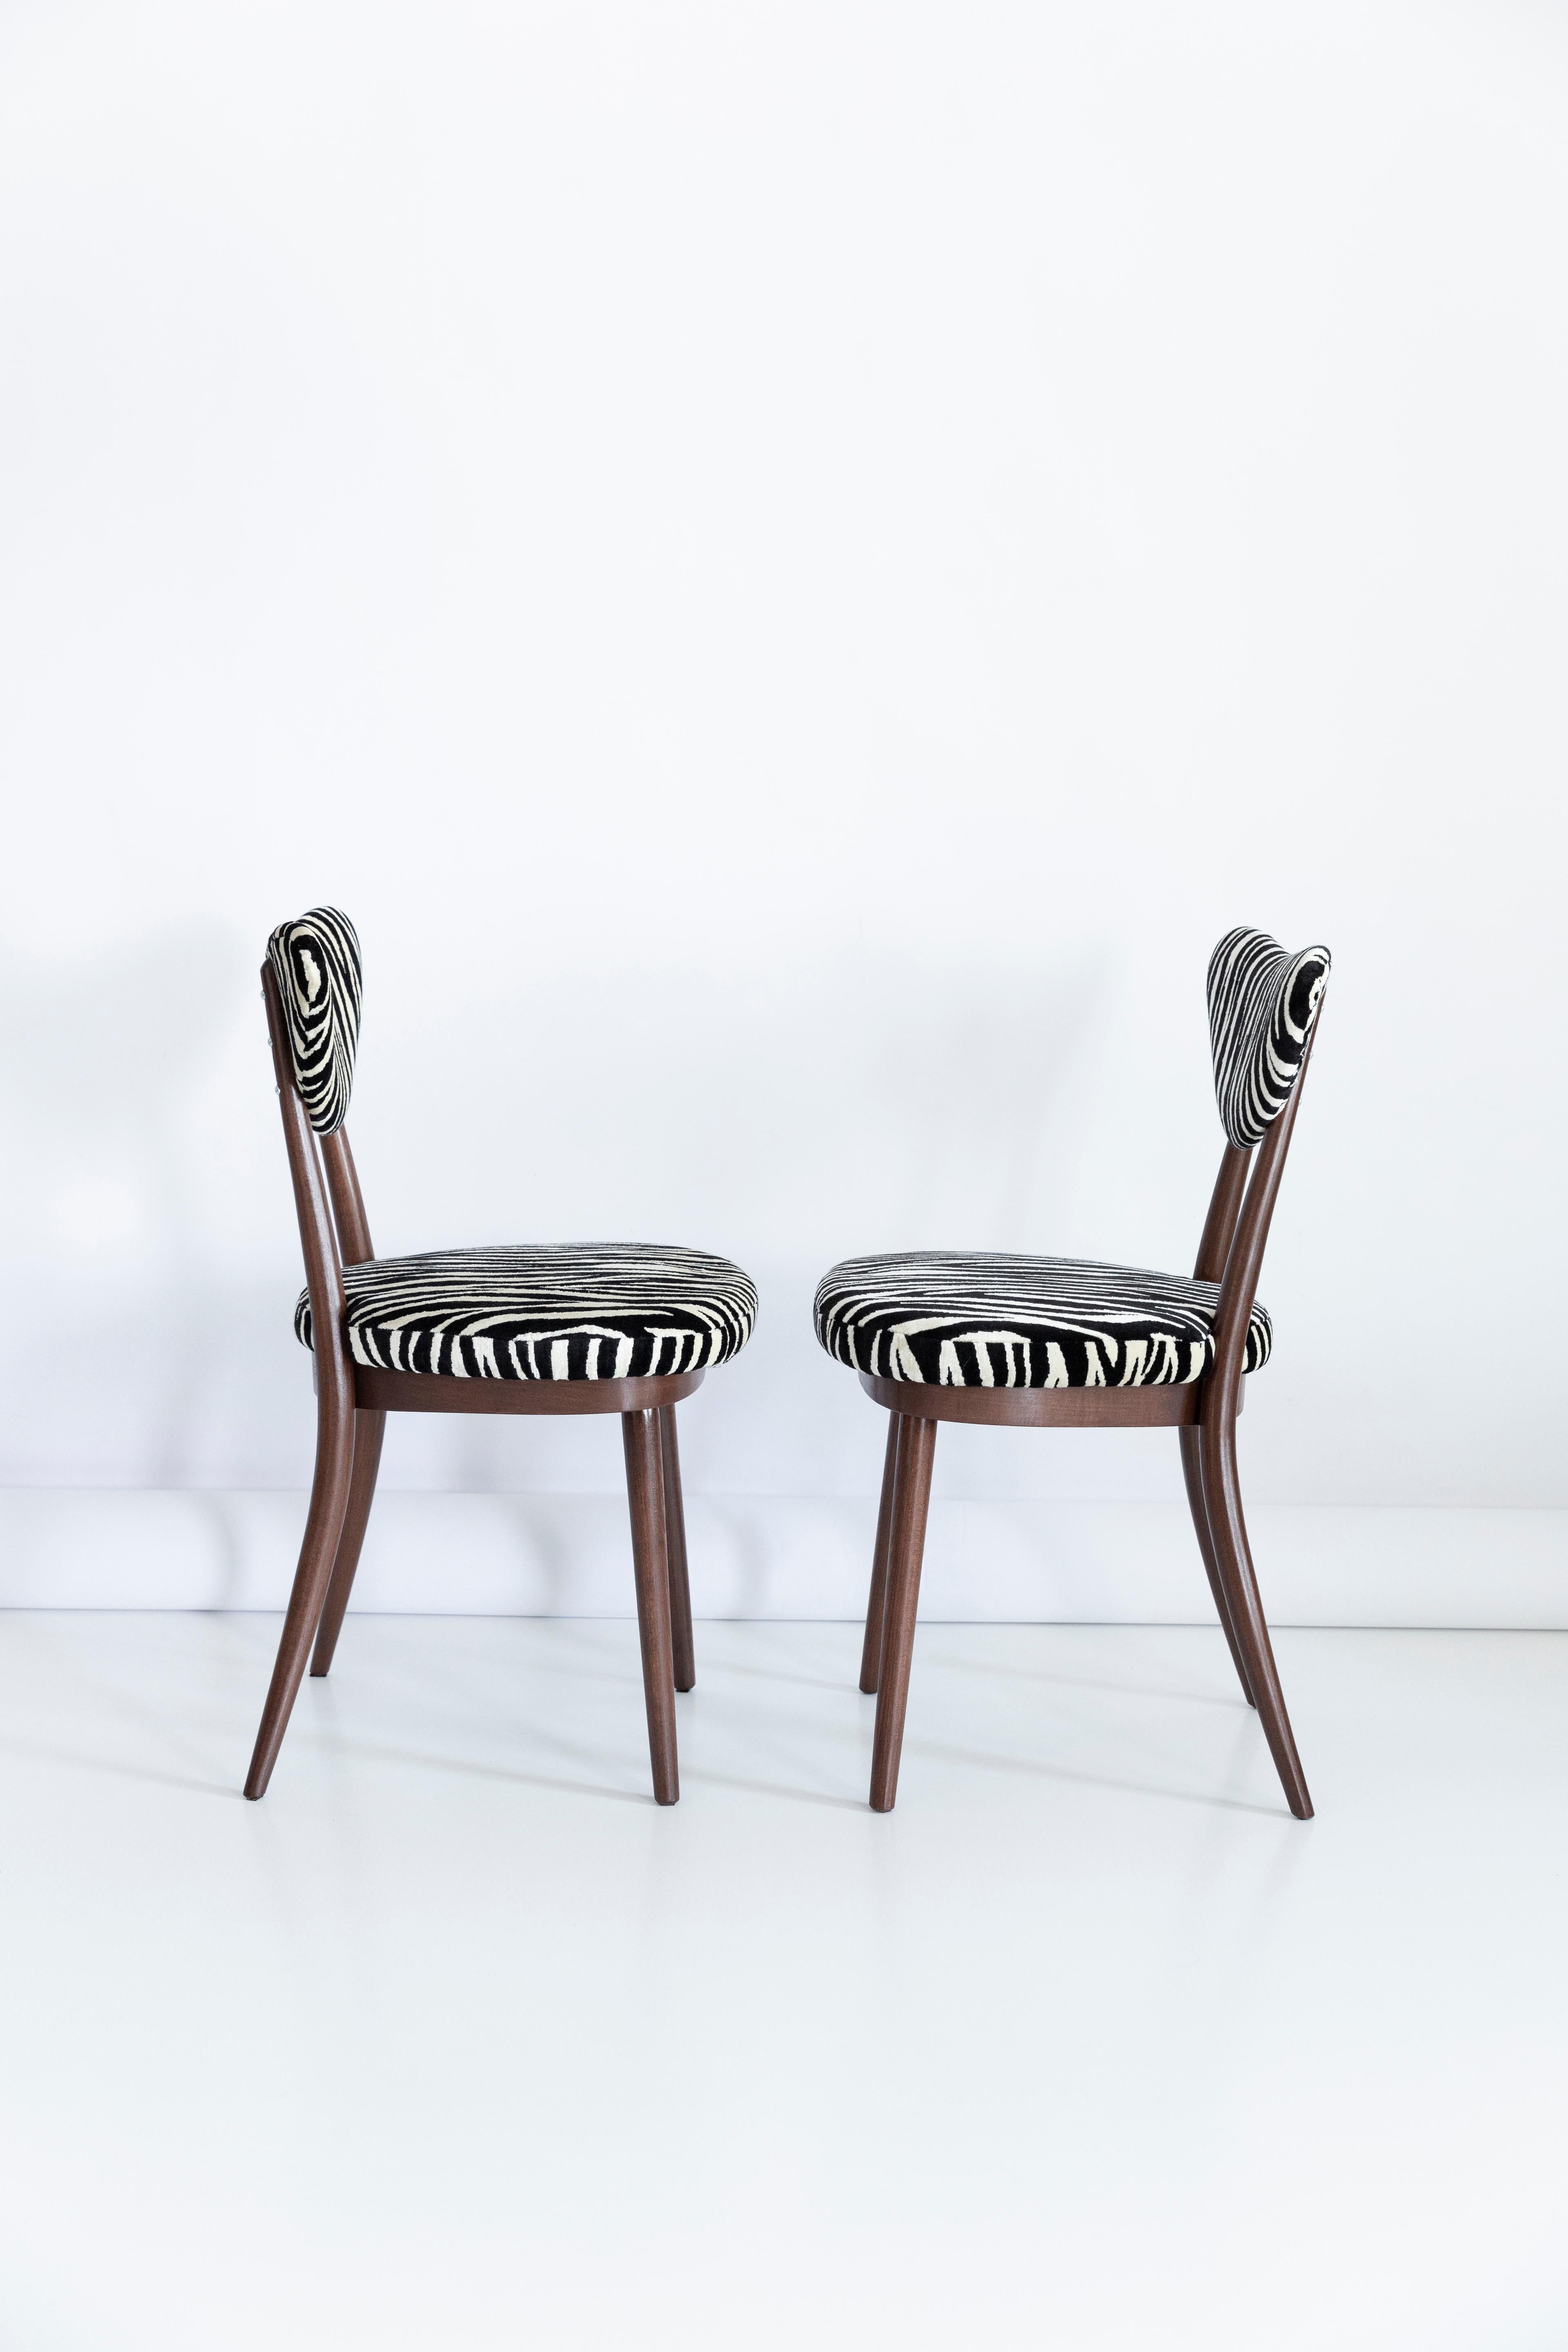 Polish Set of Four Midcentury Zebra Black and White Heart Chairs, Poland, 1960s For Sale